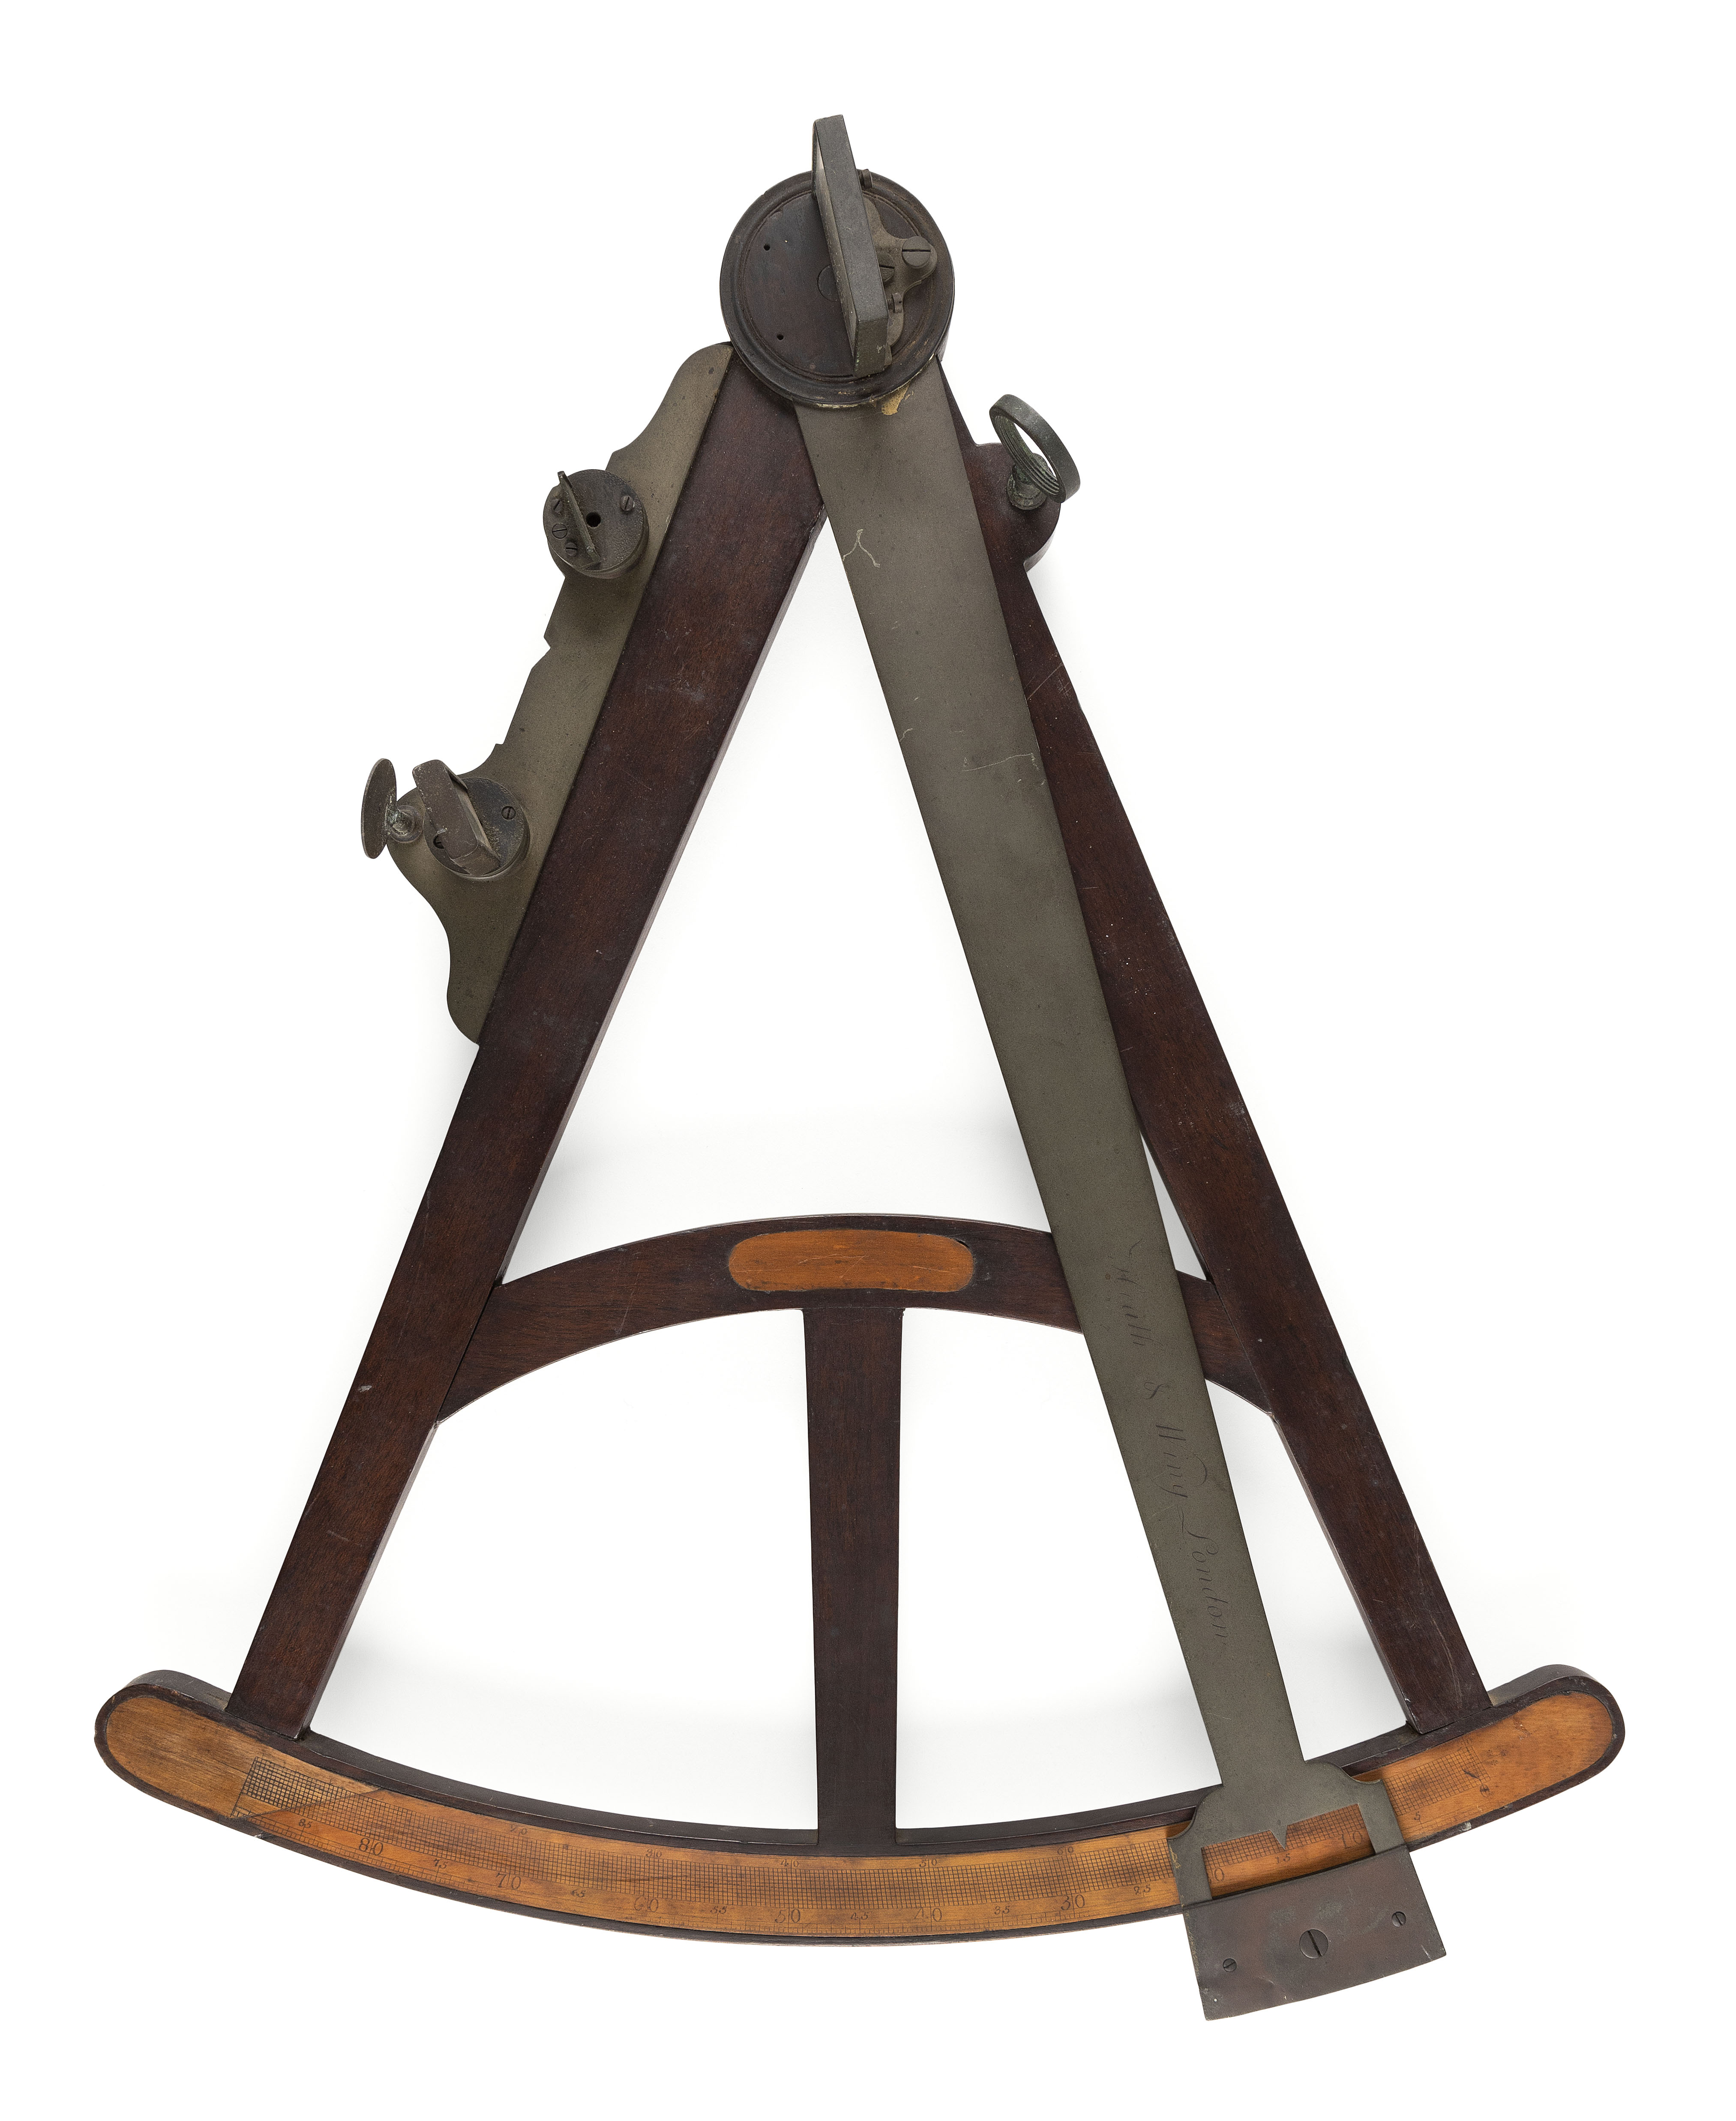 HEATH & WING OCTANT London, First Half of the 19th Century Length 19